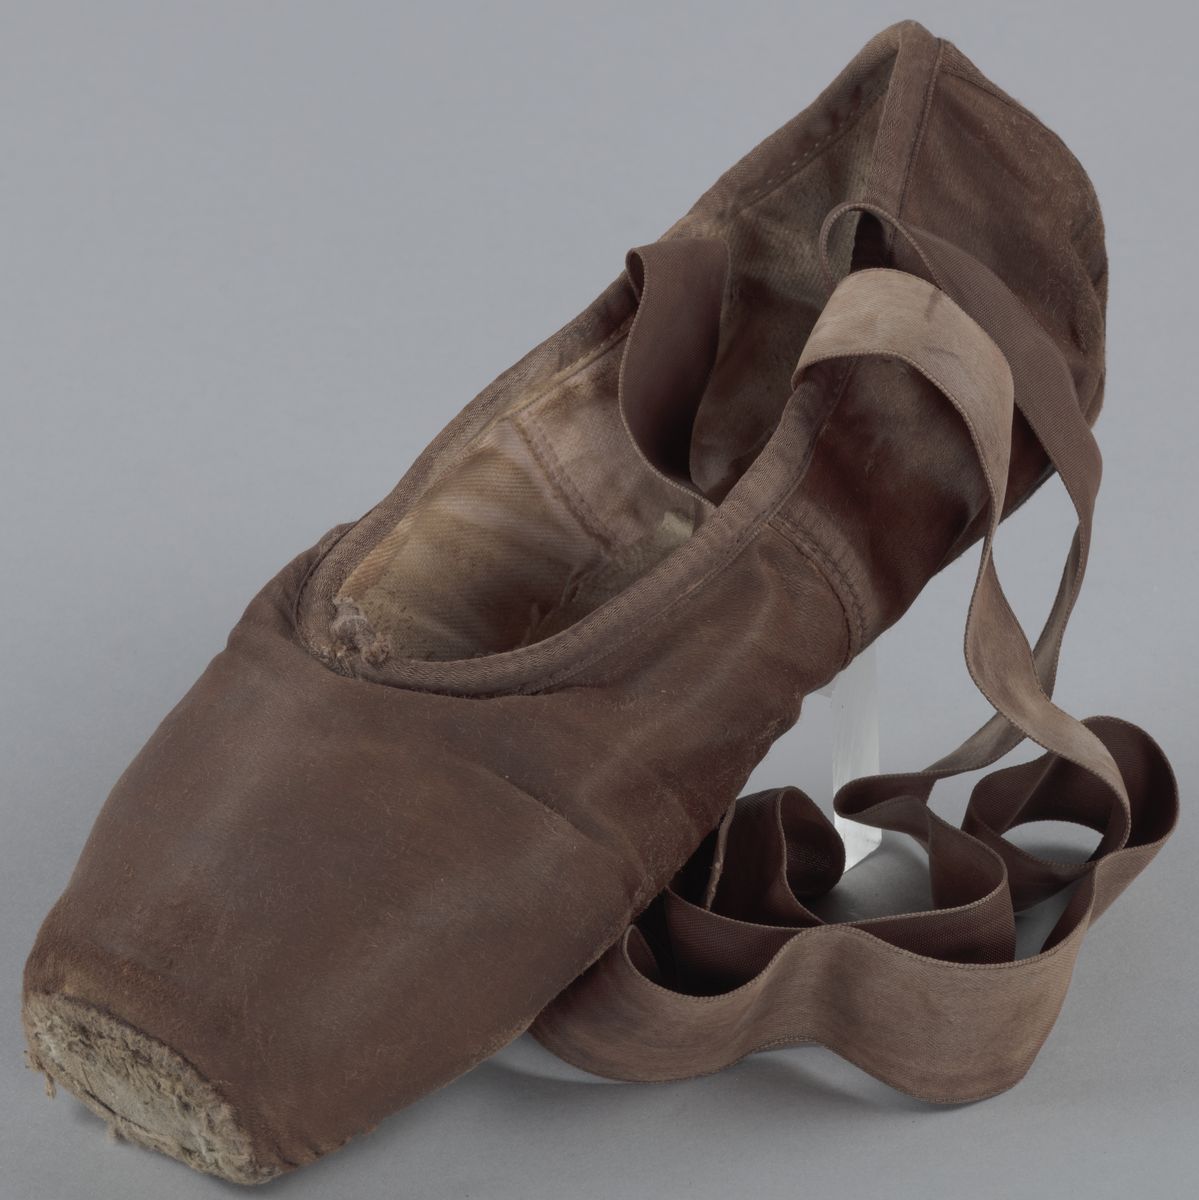 for black ballerinas, painting ballet slippers is a tedious but essential ritual